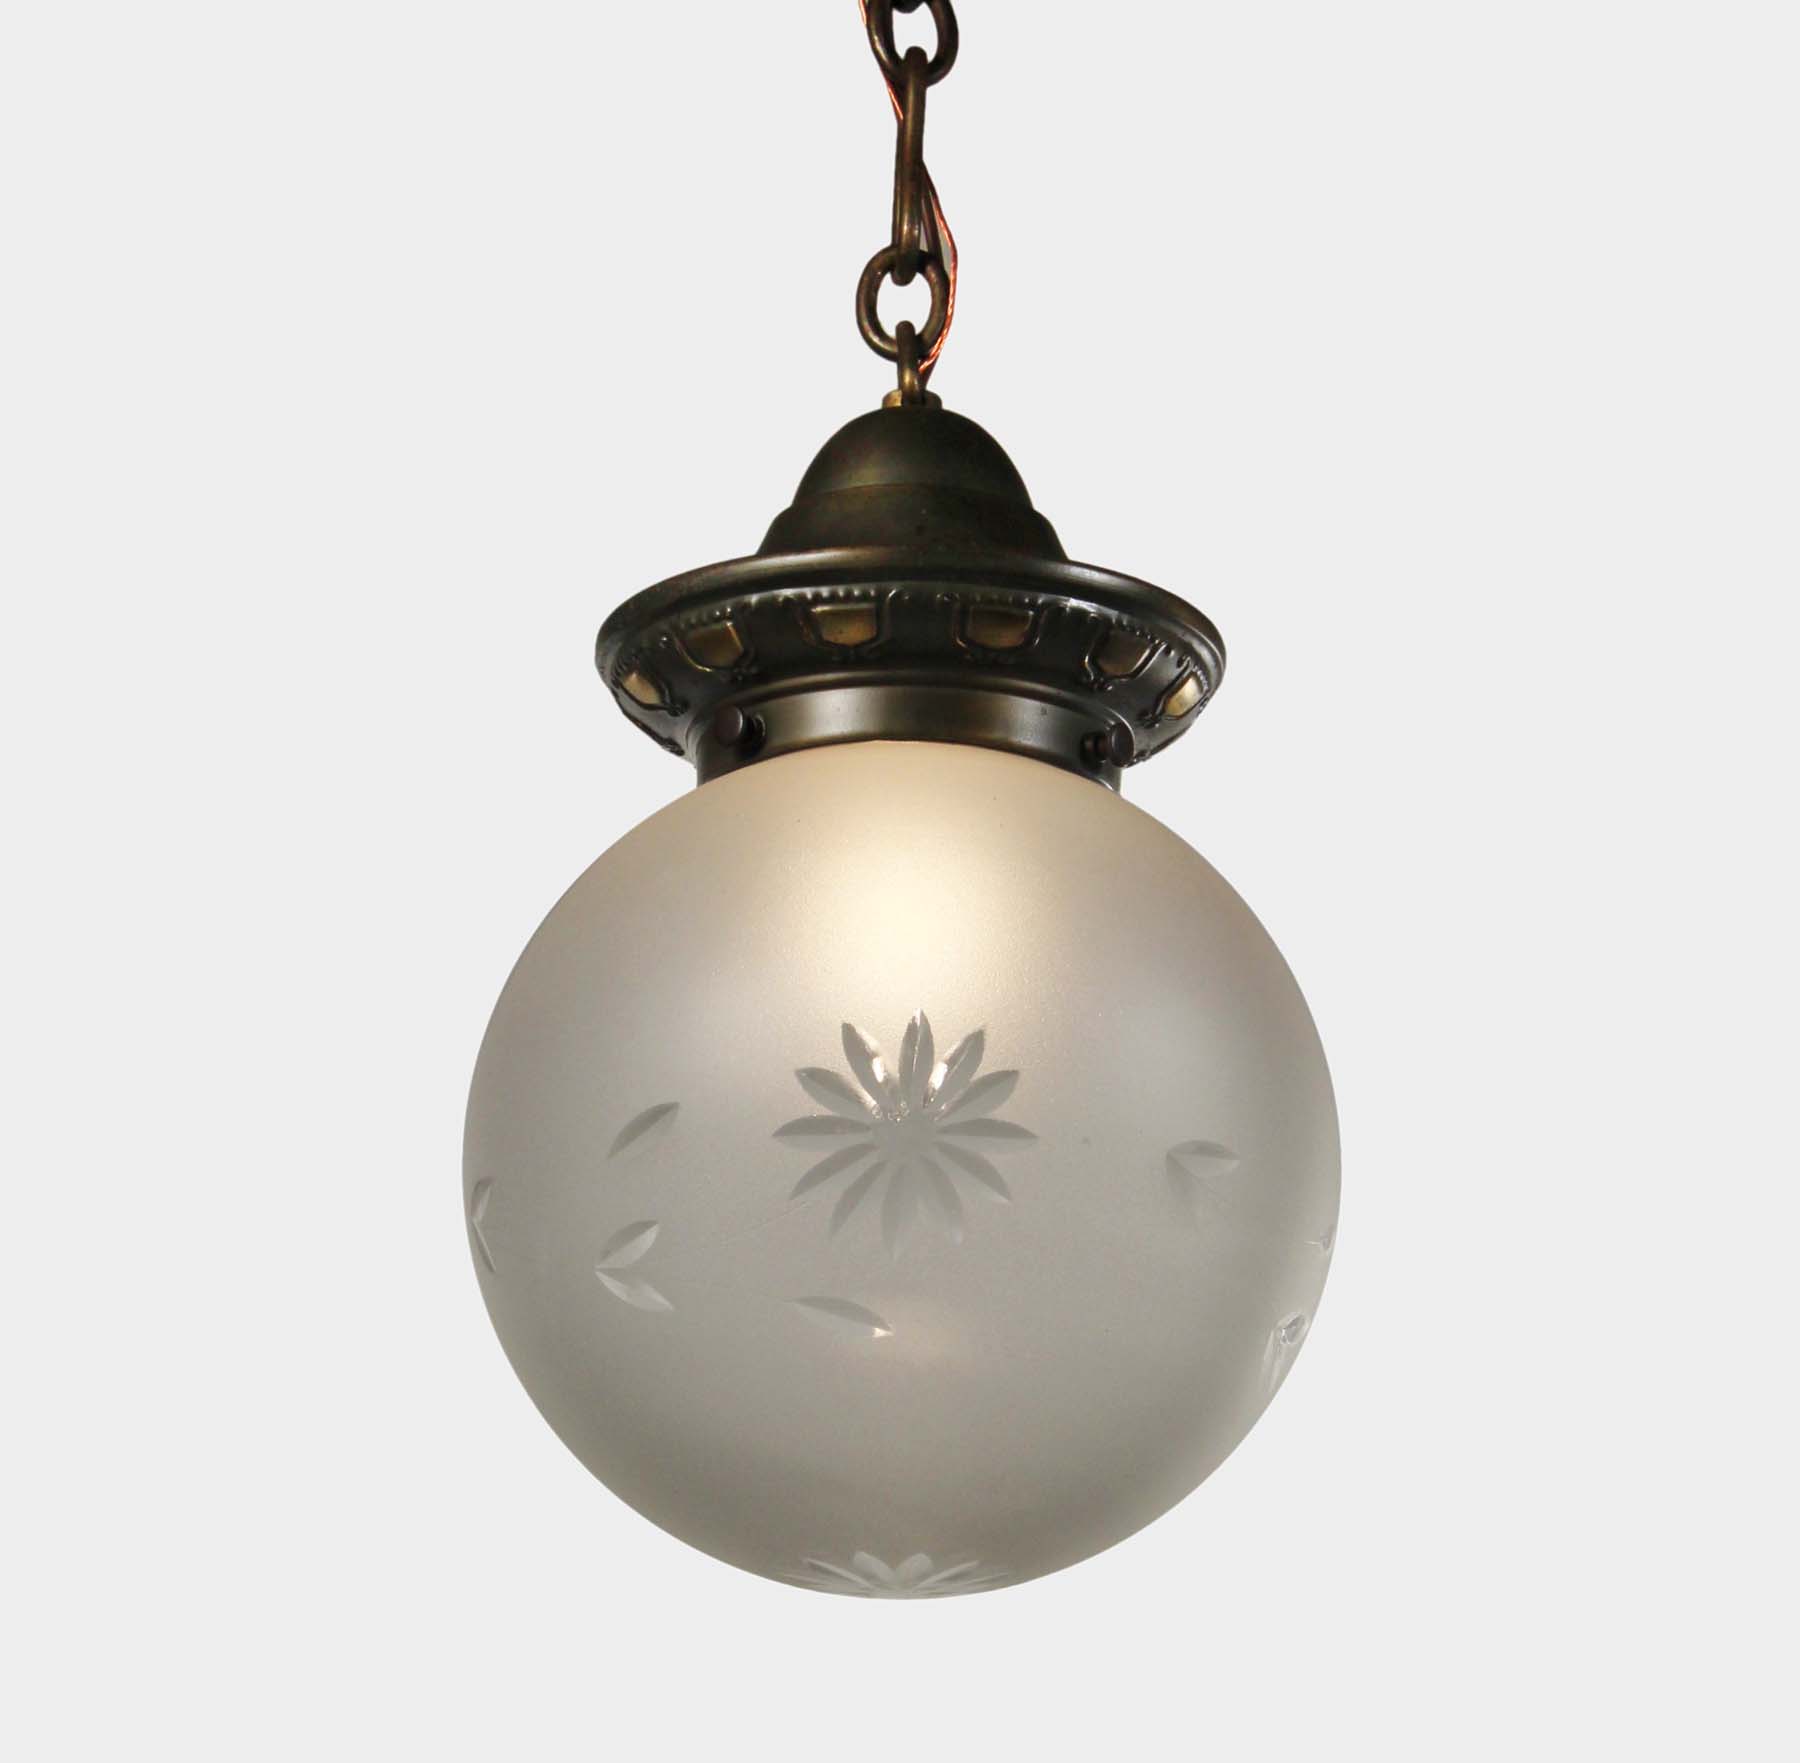 SOLD Antique Brass Pendant with Original Ball Shade, c. 1910-68186